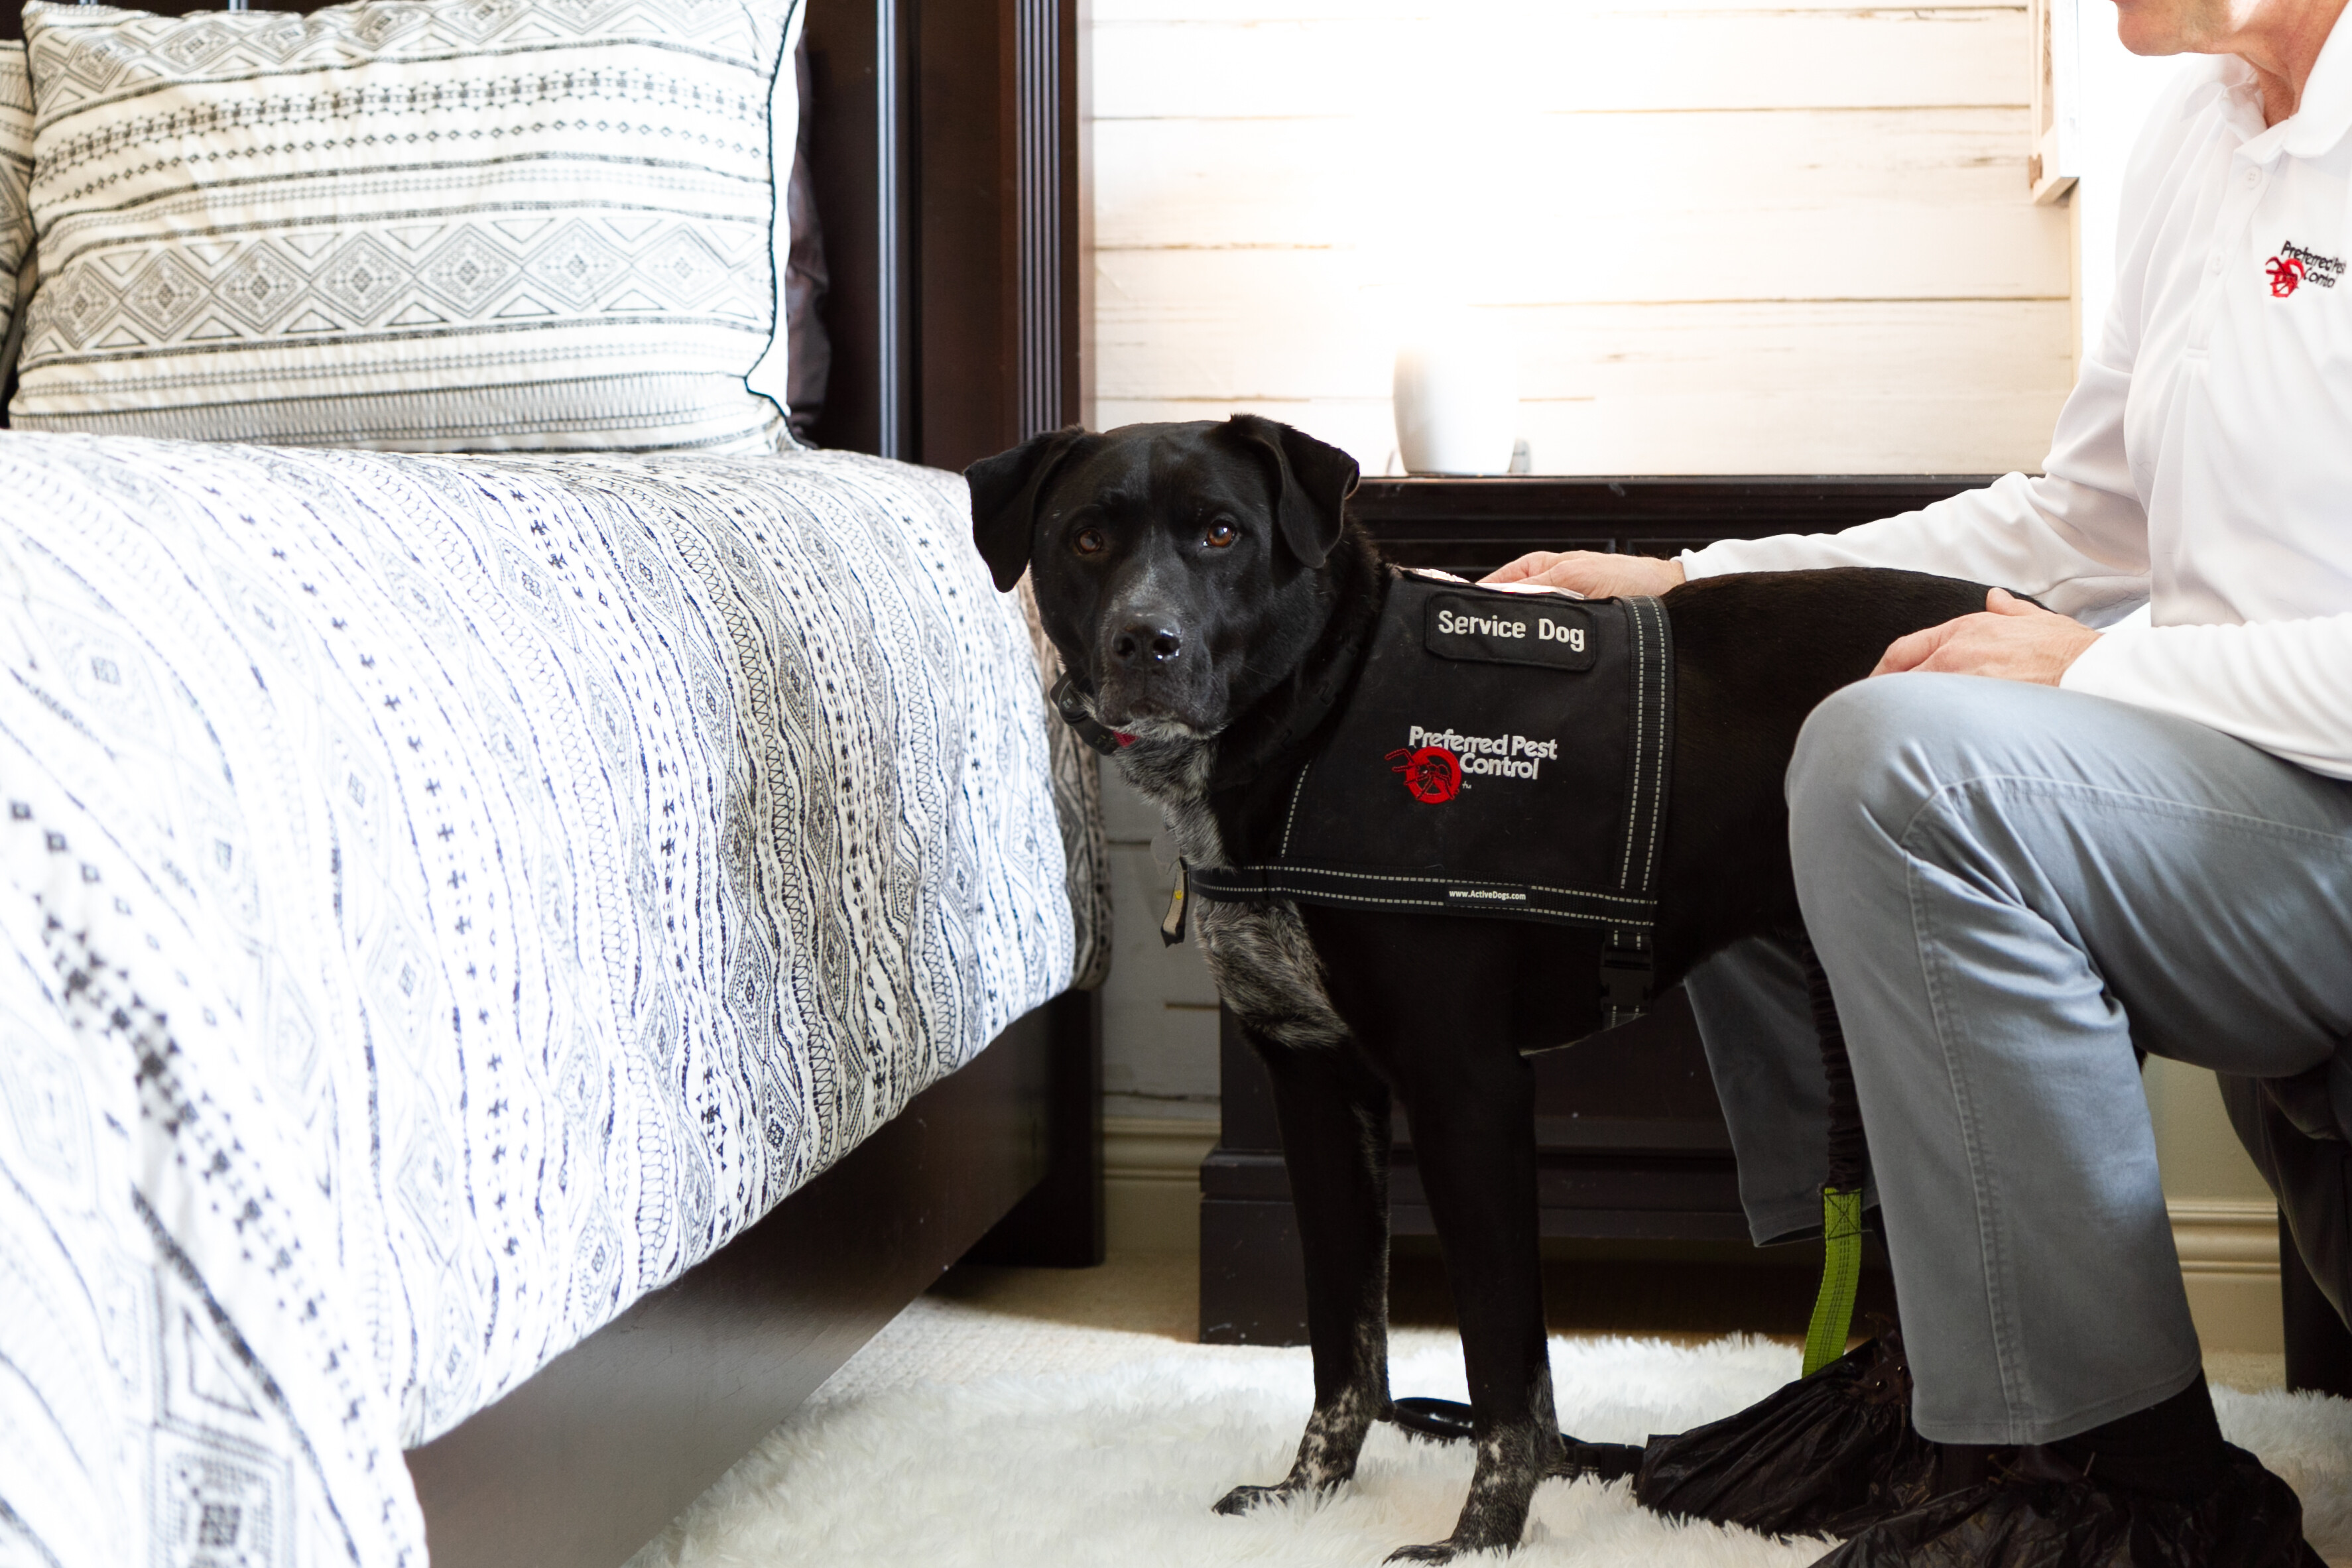 service dog - bed bug detection dog by bed.